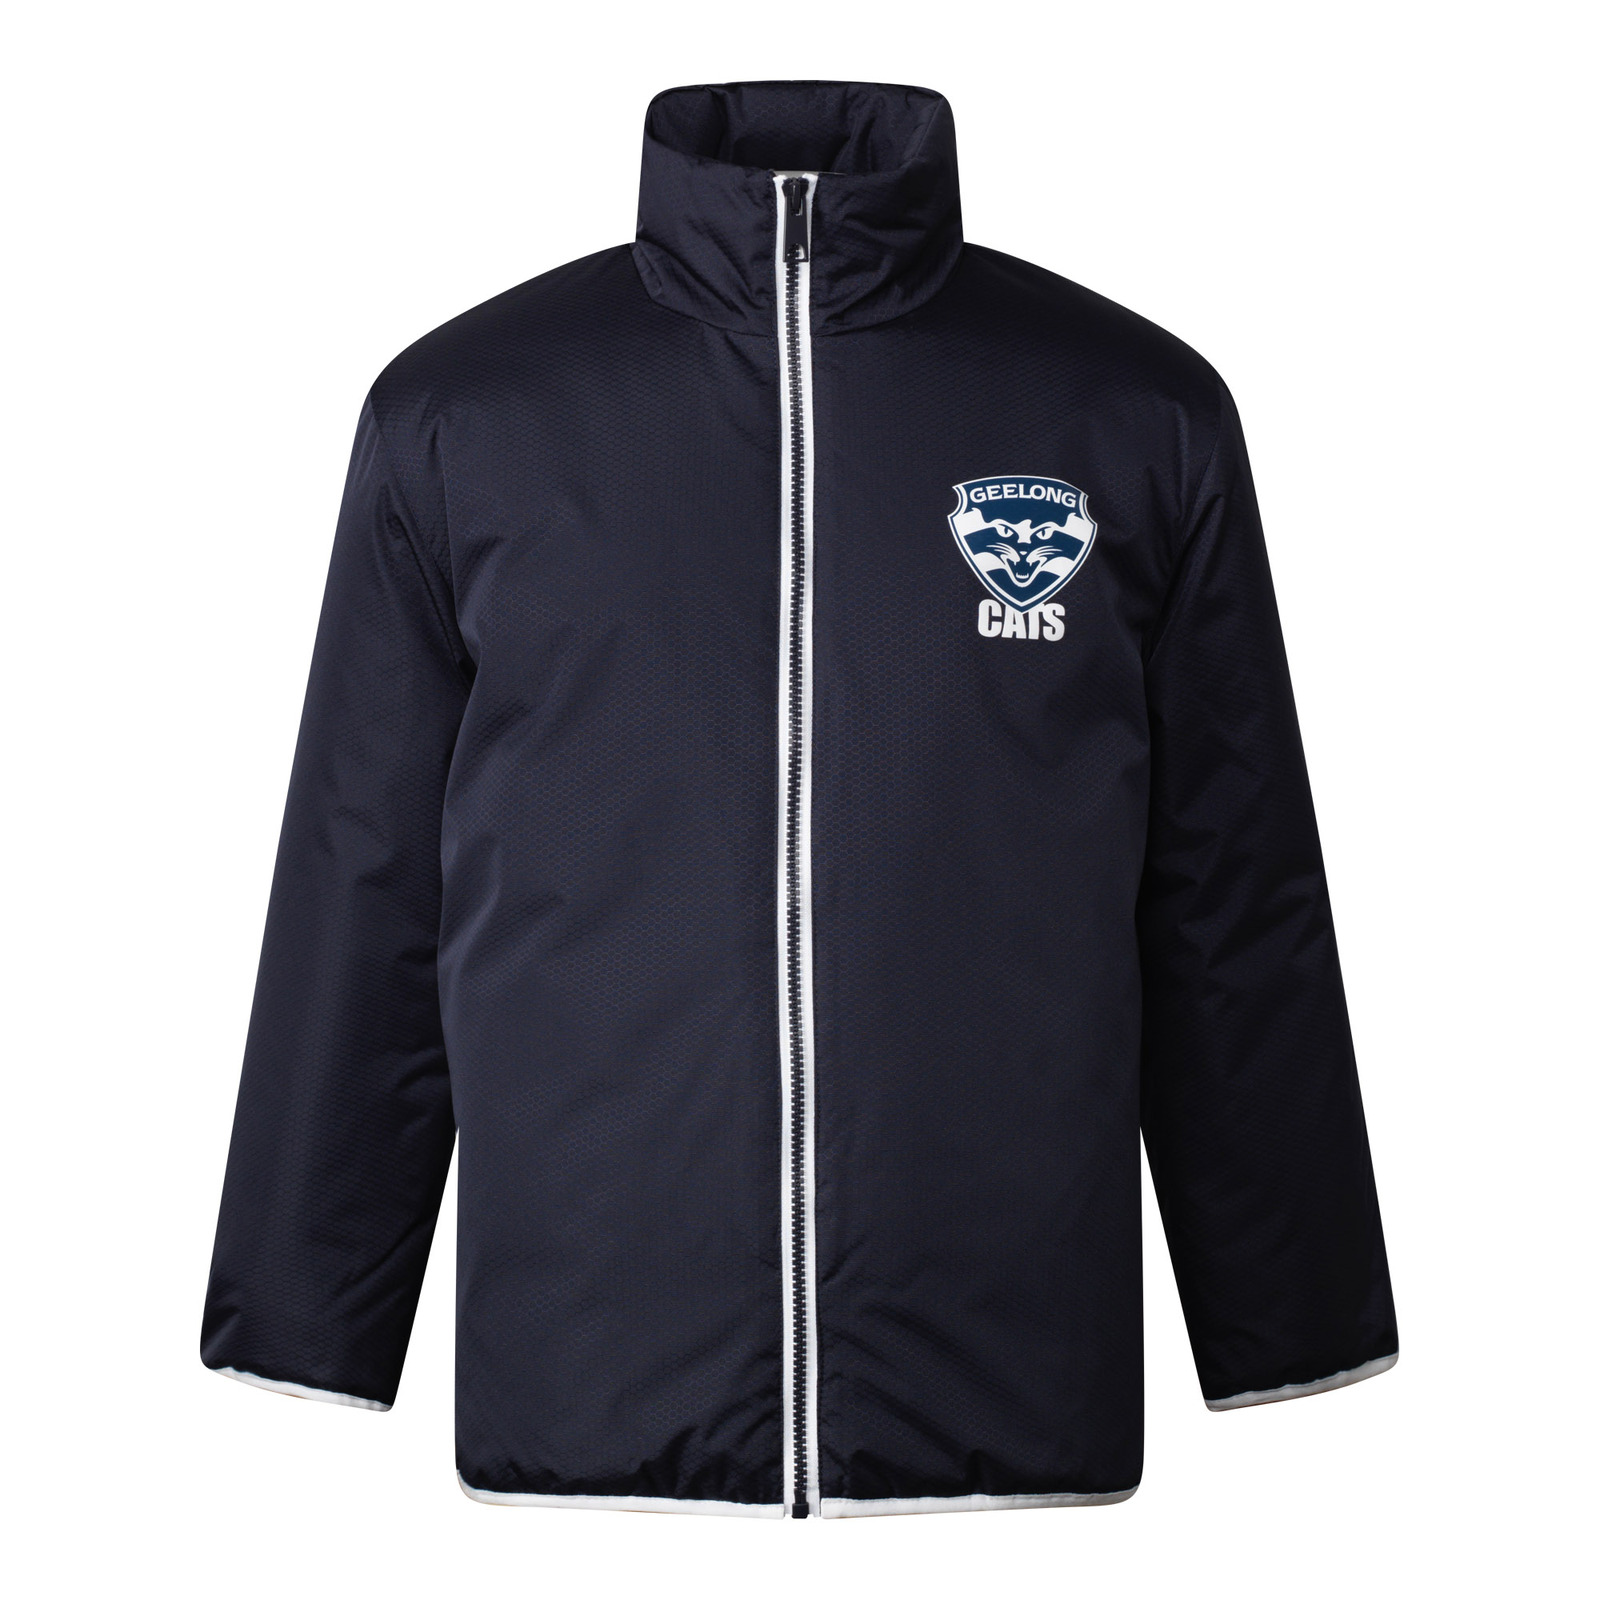 Geelong Cats AFL Youth Supporter Jacket